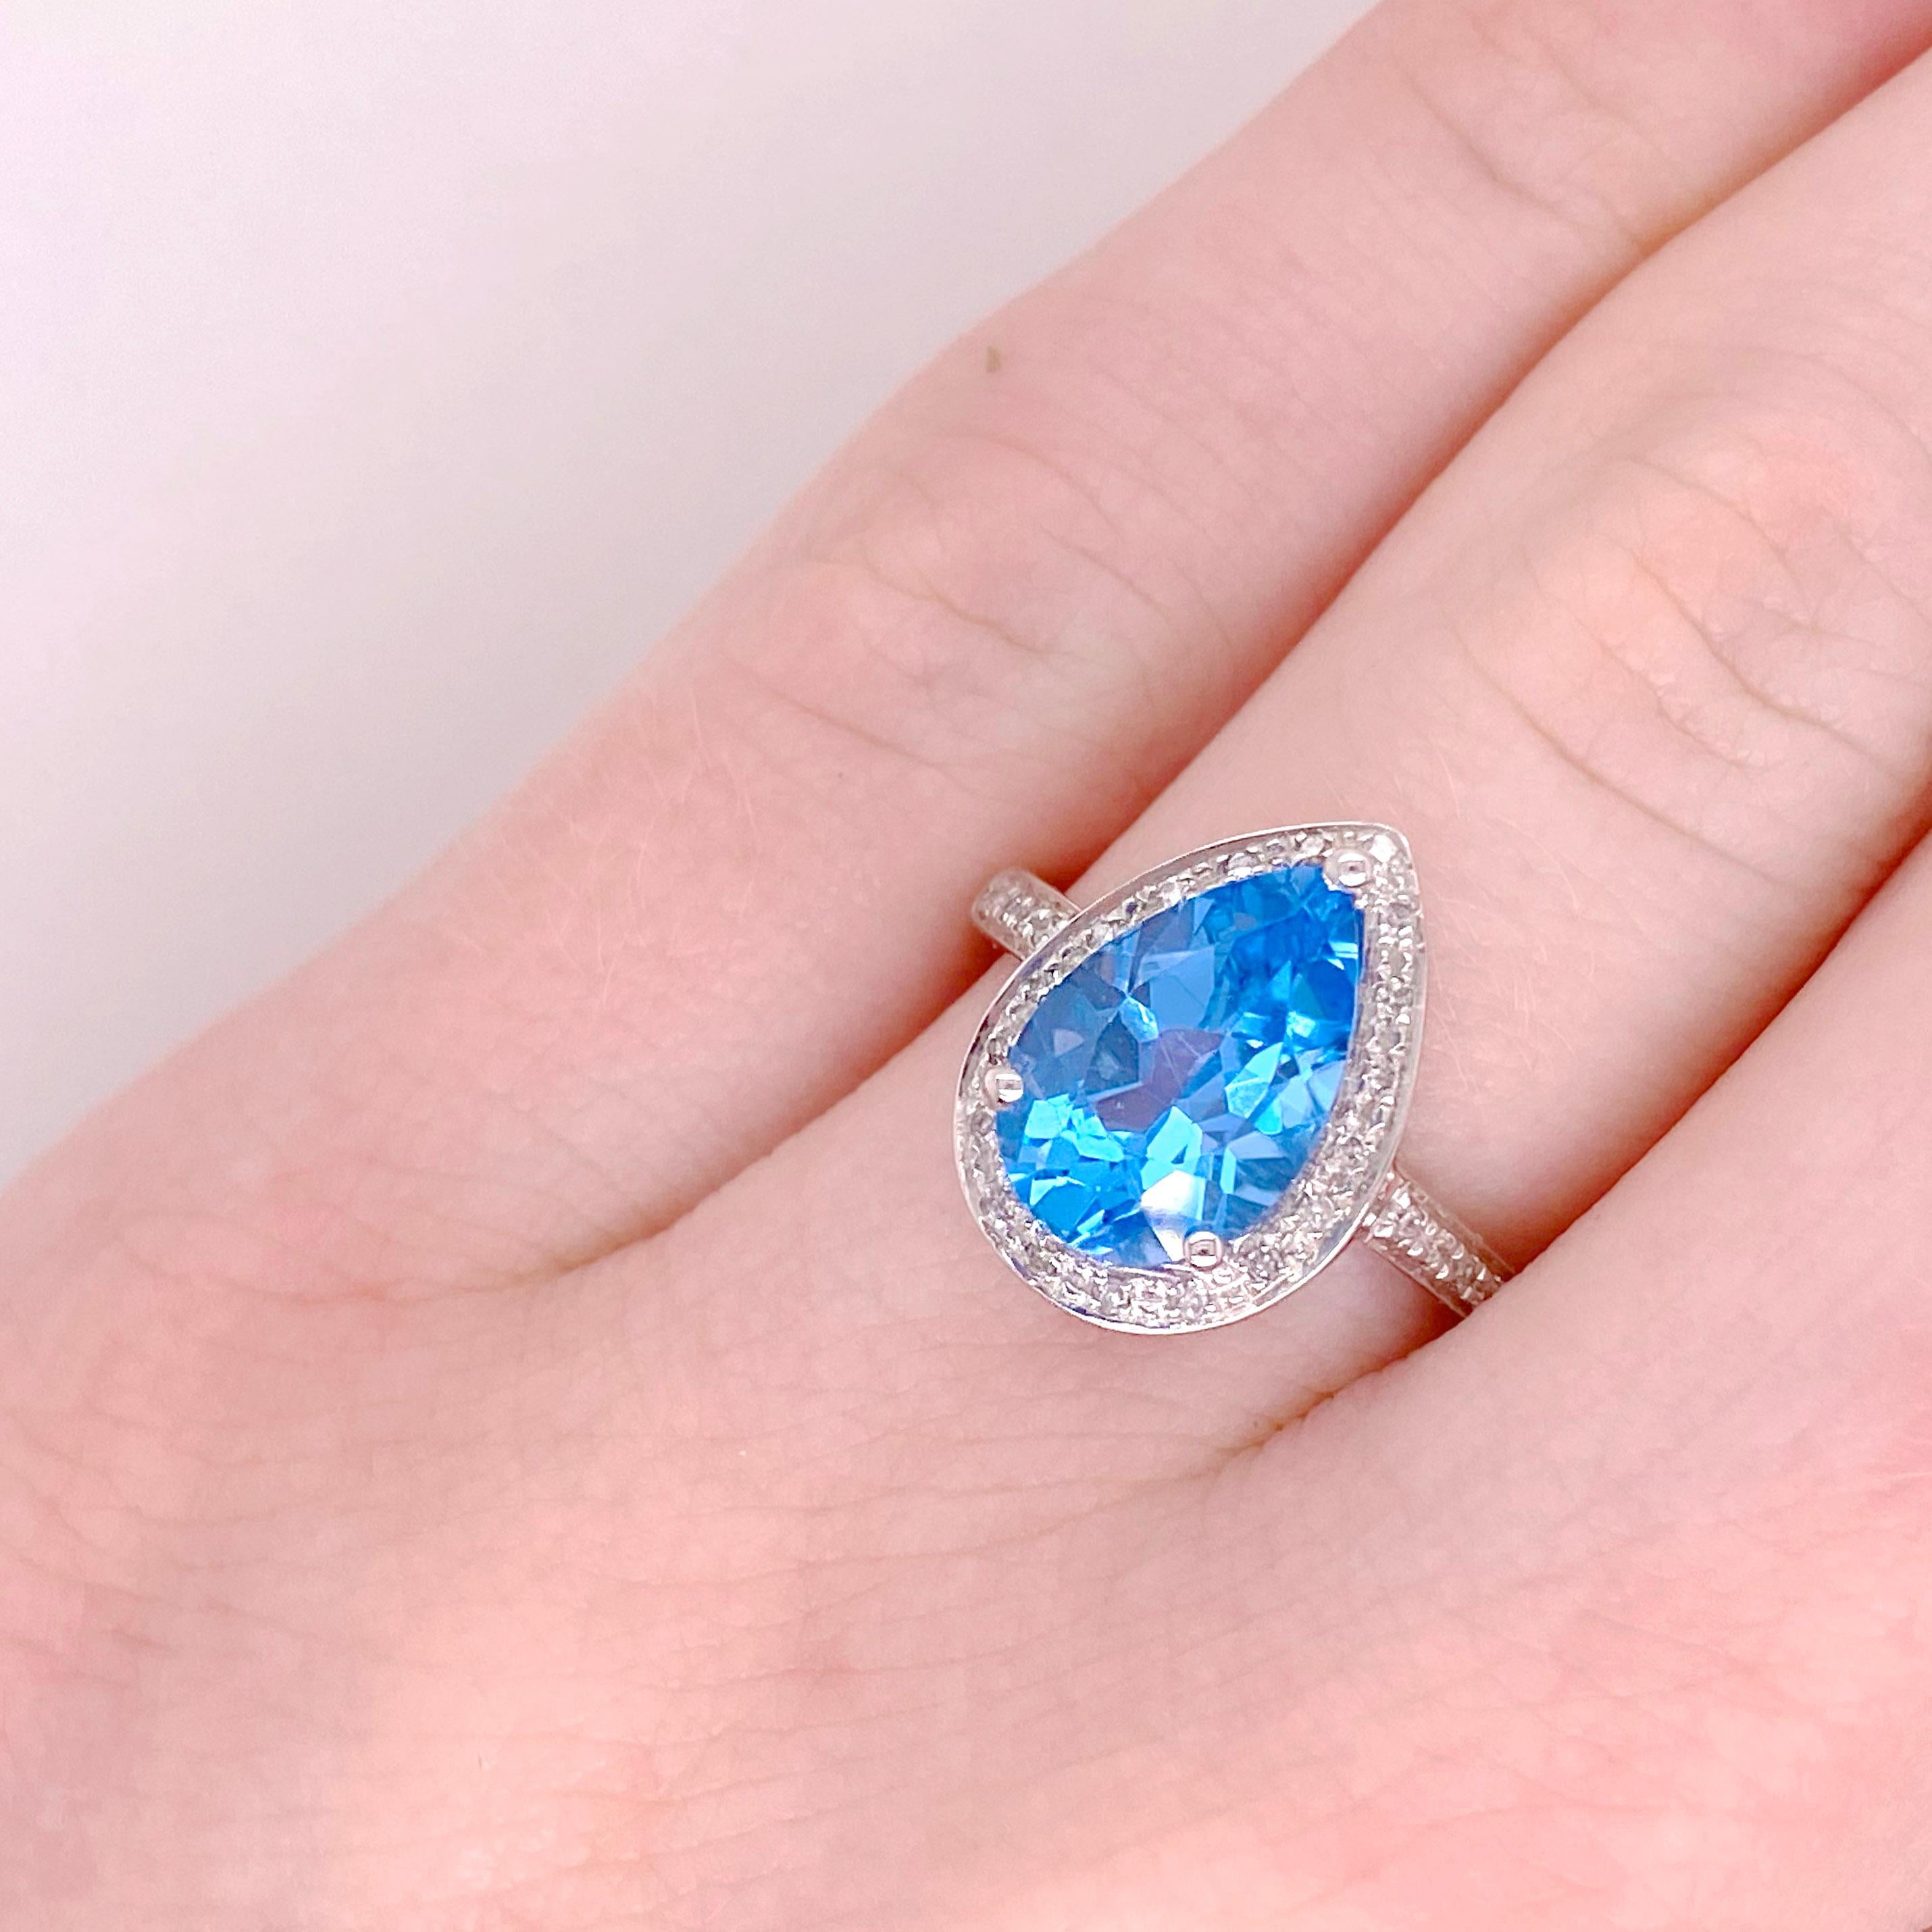 Metal Quality: 14 kt White Gold 
Diamond Number: 28
Diamond Total Weight: .12 carat 
Diamond Clarity: VS2 (excellent, eye clean)
Diamond Color: G (excellent, near colorless)
Diamond Shape: Round Brillant 
Gemstone: Blue Topaz
Gemstone Weight: 3.77